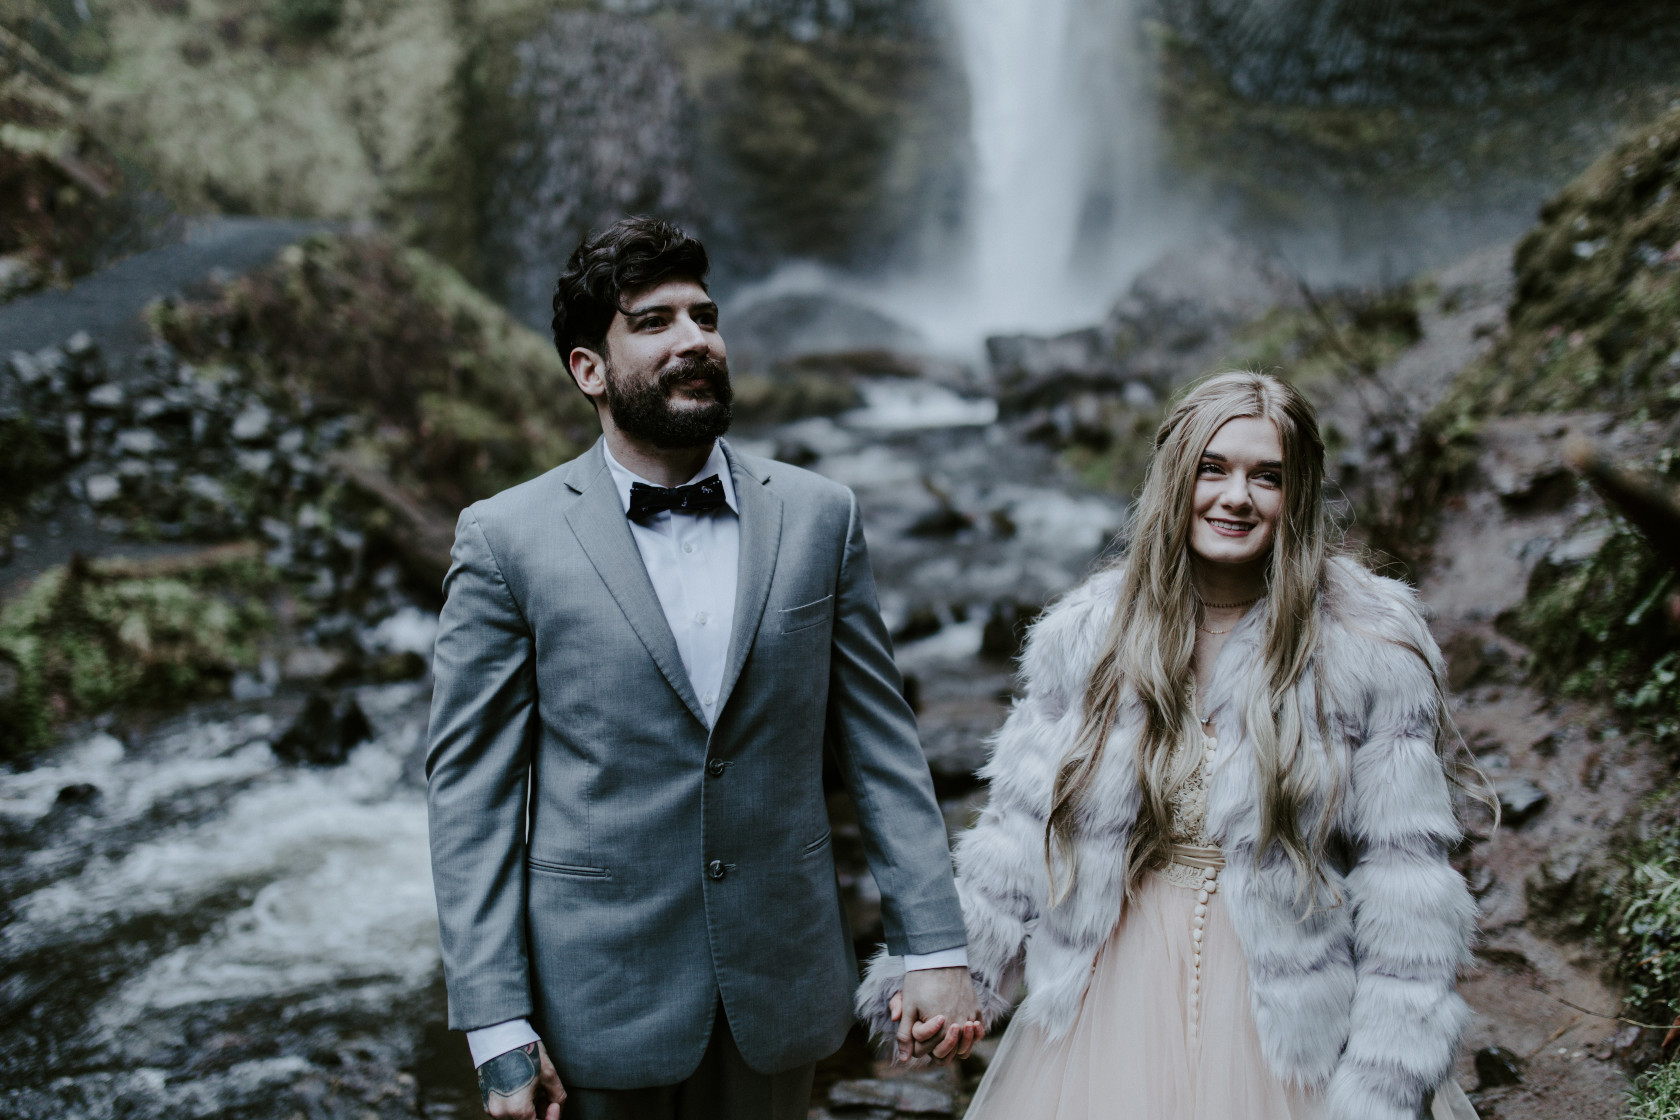 Boris and Tyanna hold hands along a stream at Latourell Falls. Adventure elopement in the Columbia River Gorge by Sienna Plus Josh.